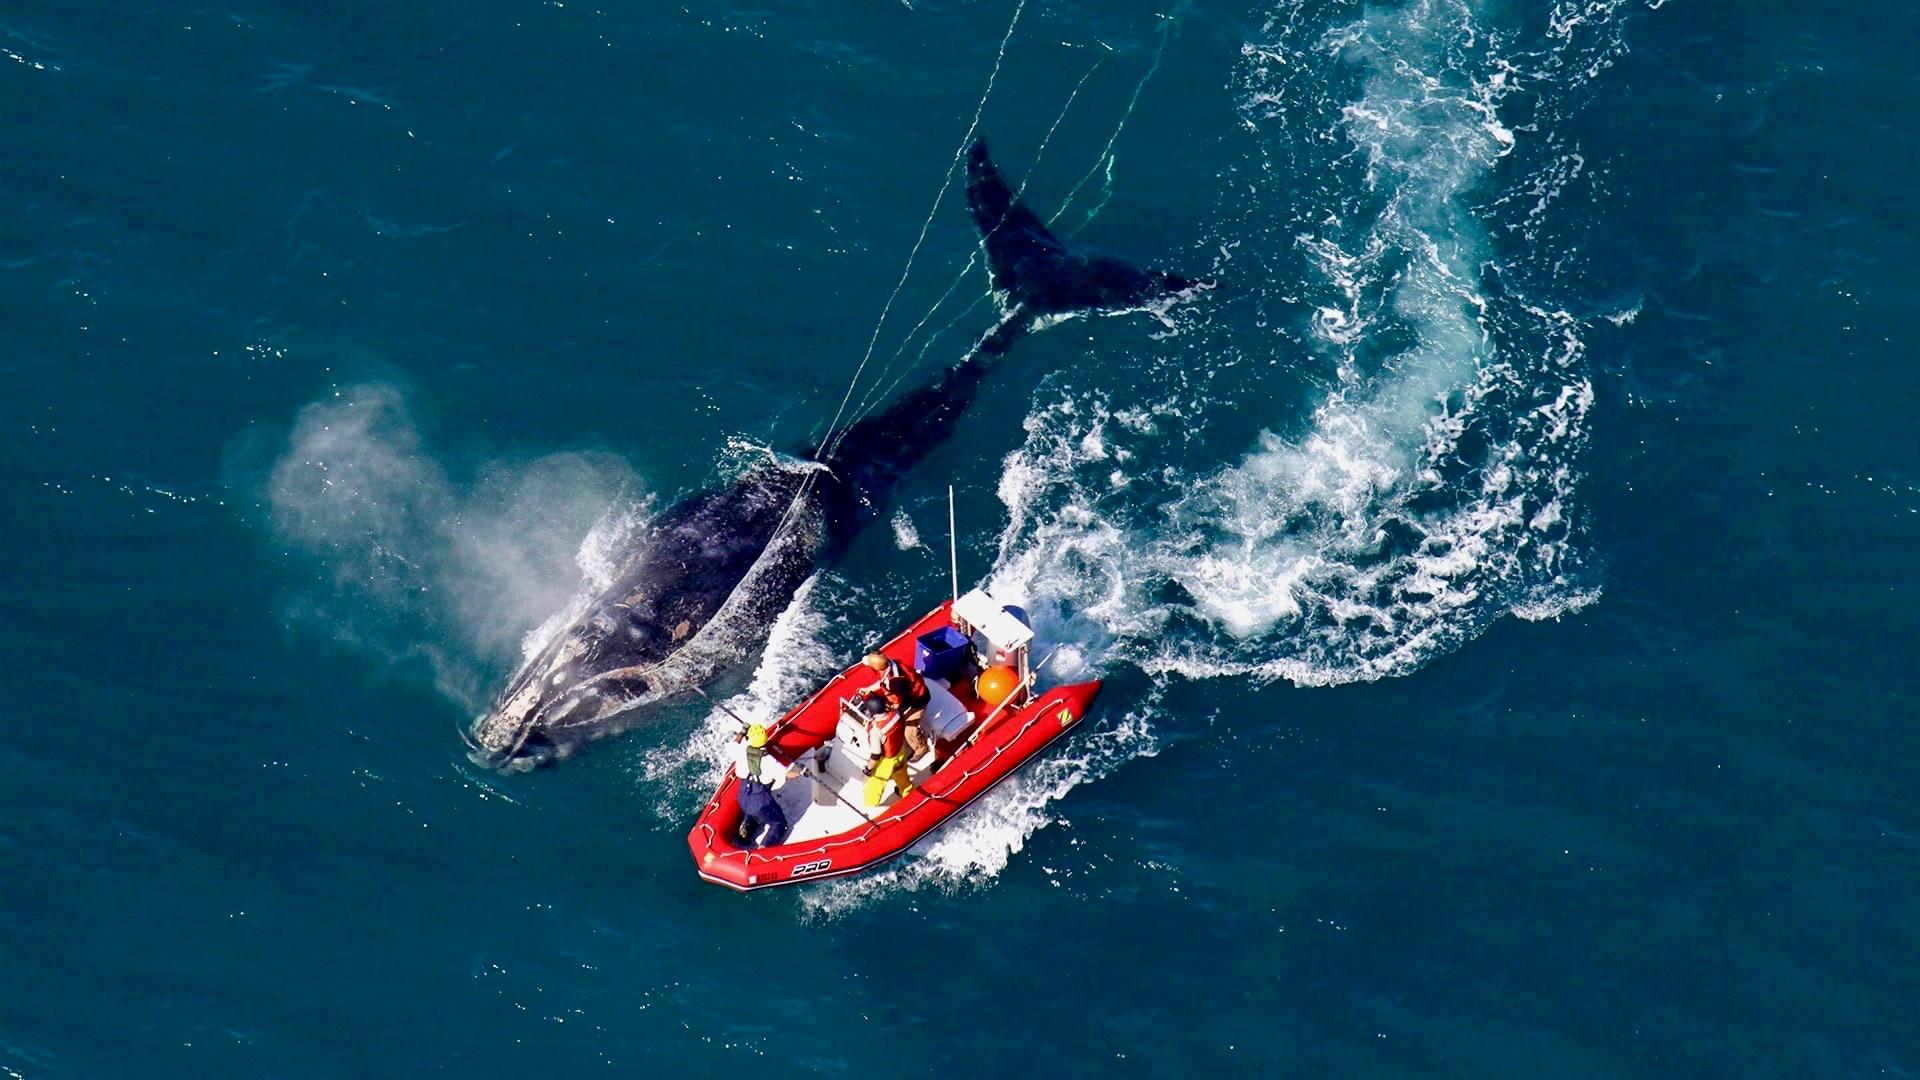 Image of a whale next to a boat.